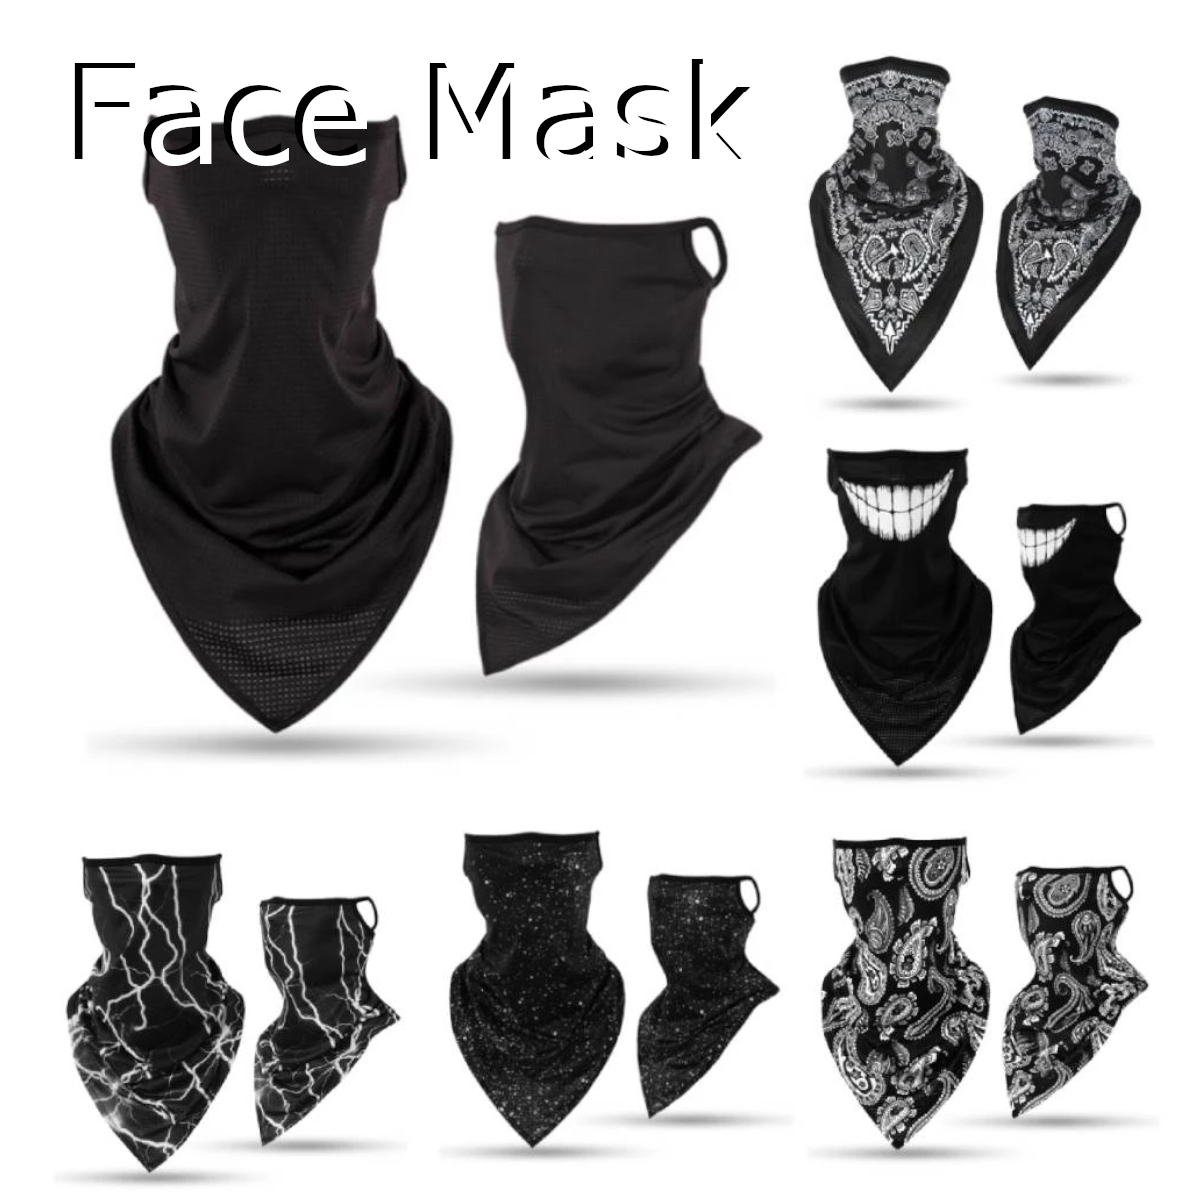  face mask face cover sport mask neck cover bike bicycle for summer cold sensation sunburn prevention men's lady's Halloween cosplay 